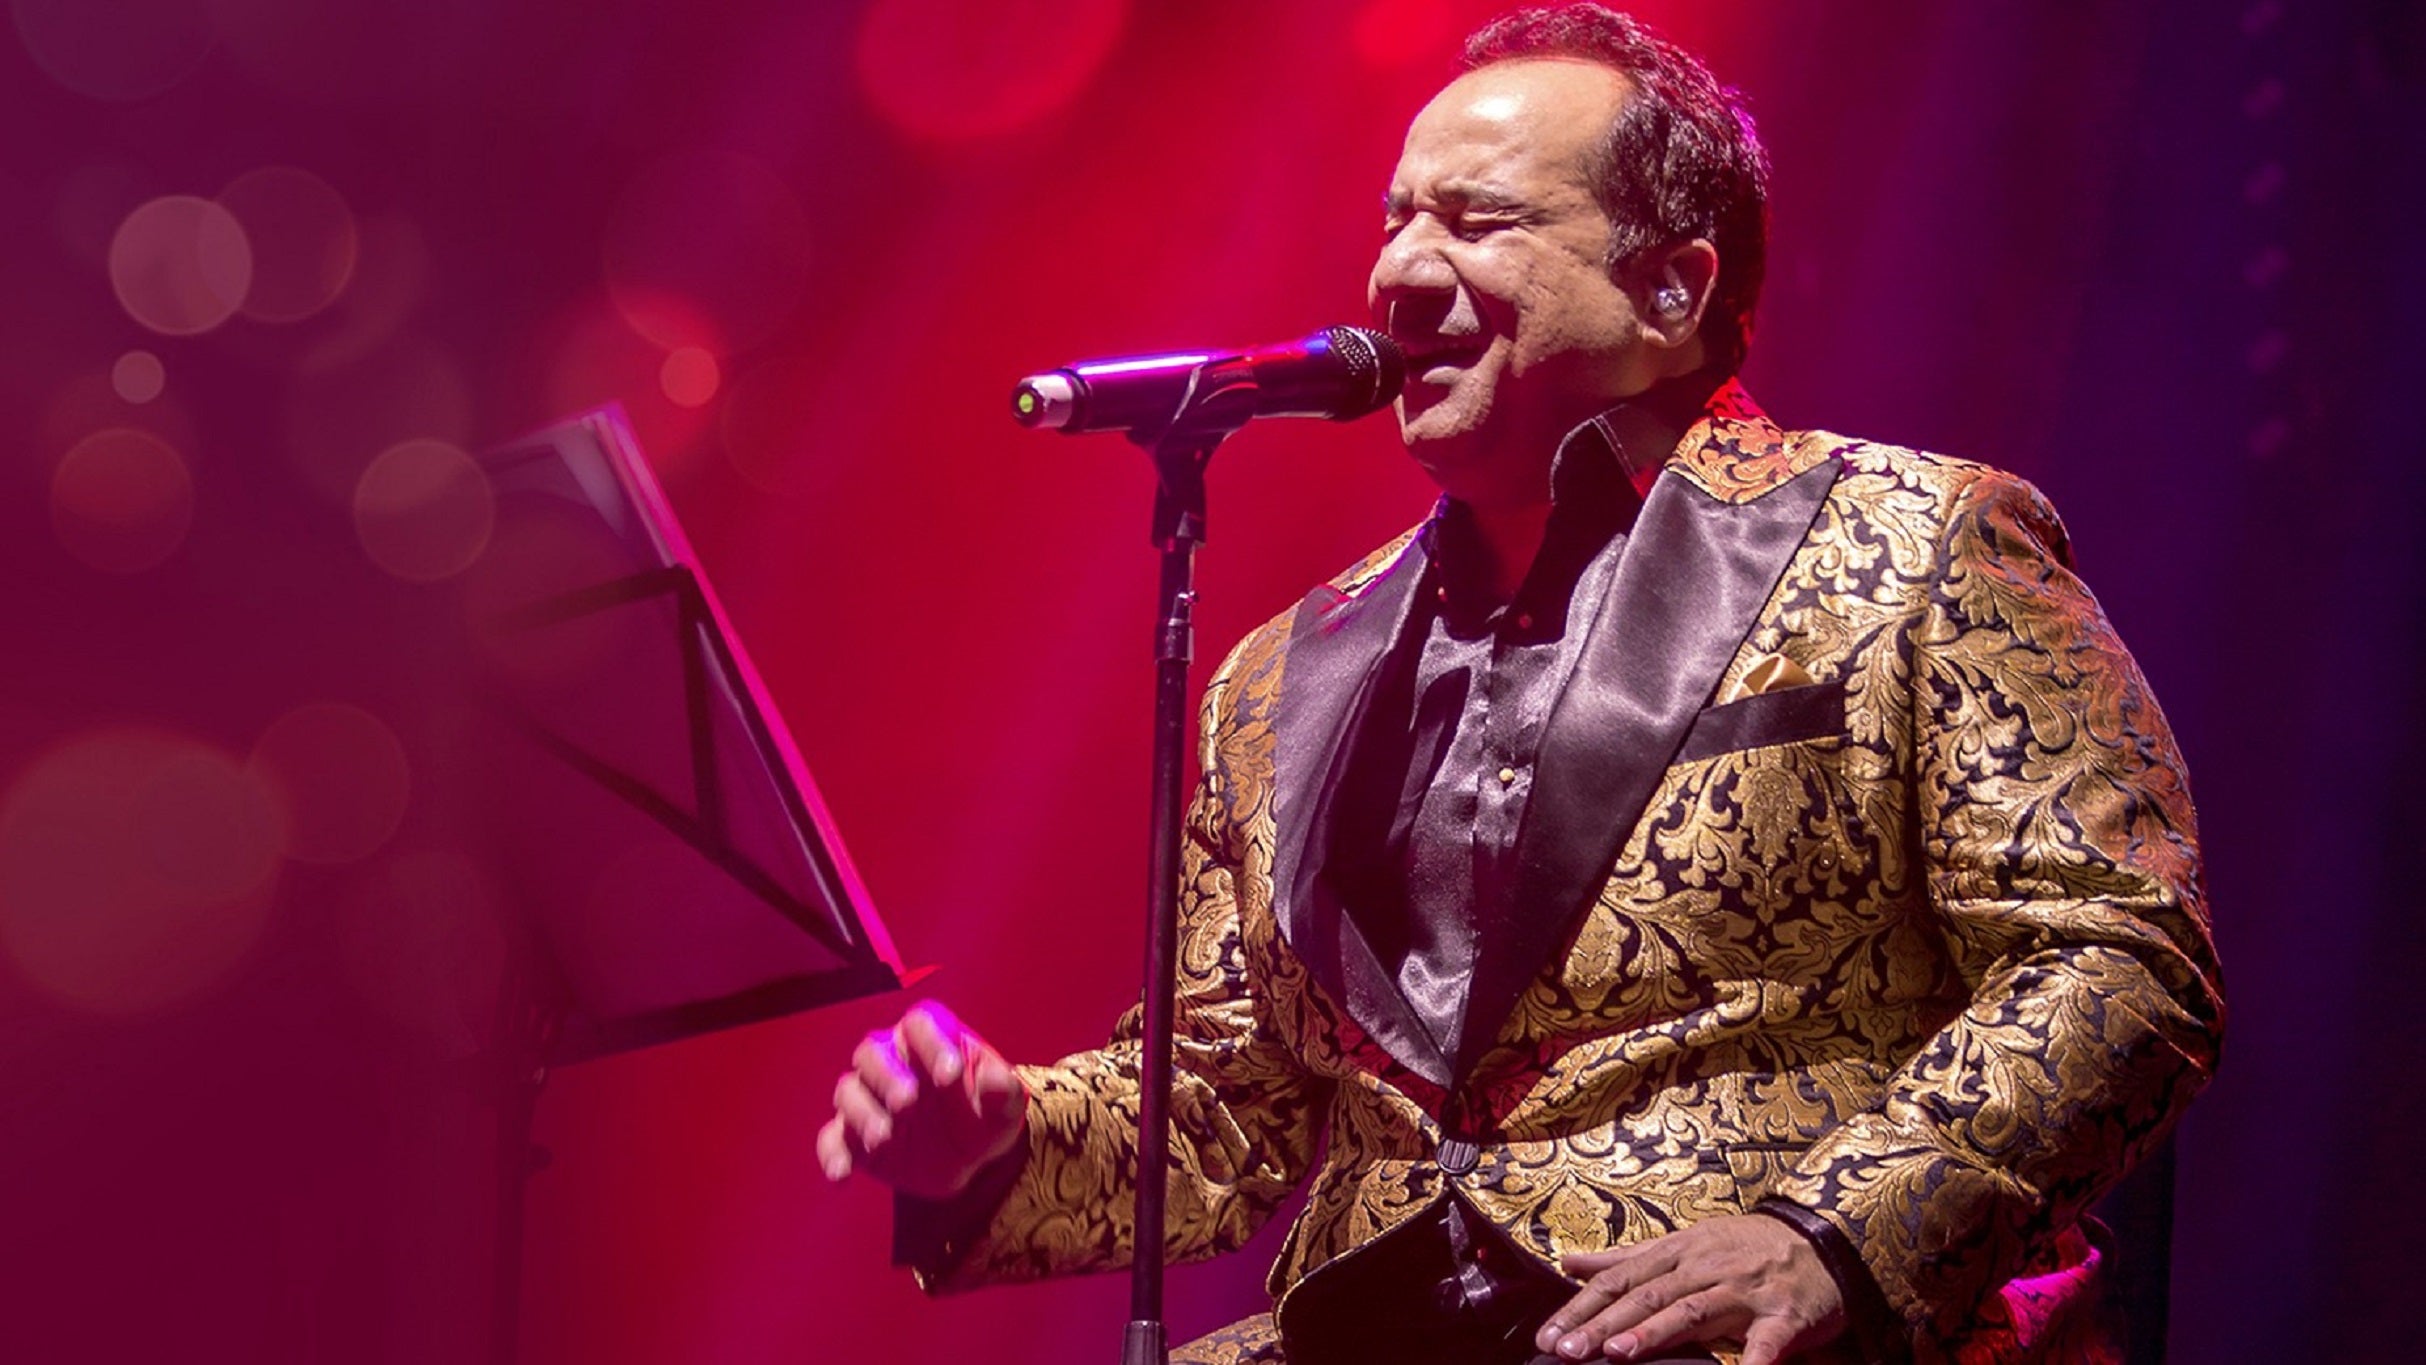 Rahat Fateh Ali Khan in Irving promo photo for Official Platinum presale offer code